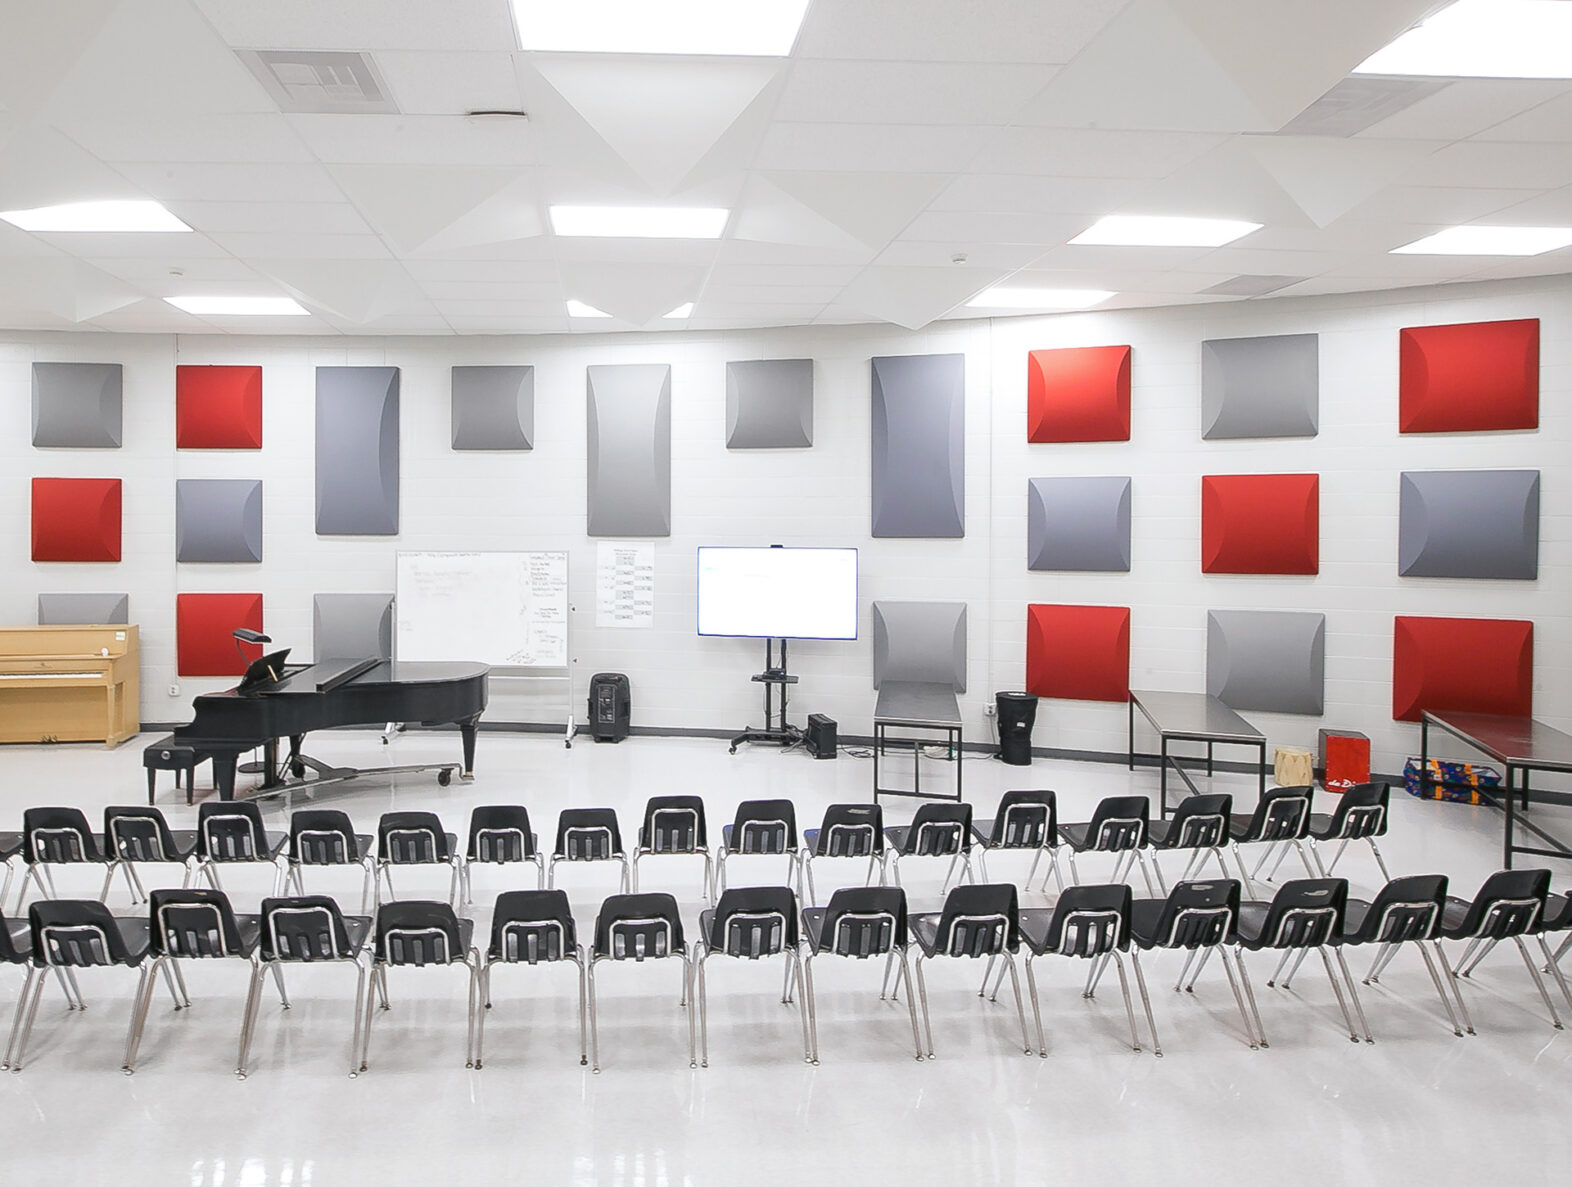 The music room at Emporia High School, a McCownGordon project.